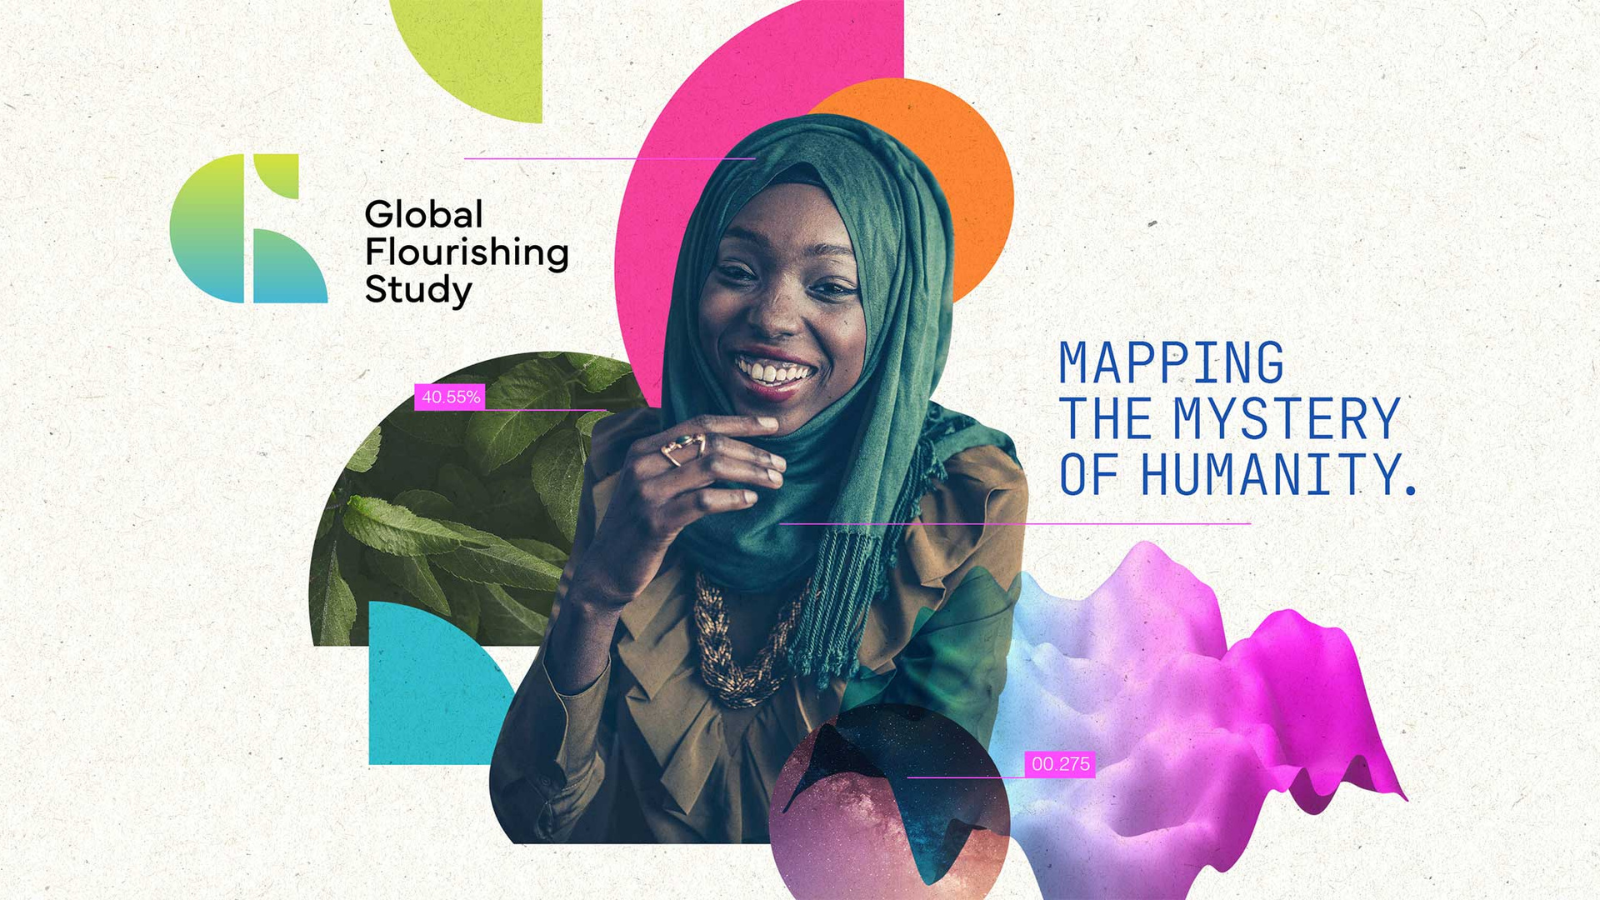 Image of woman with Global Flourishing Study logo and text: "Mapping the mystery of humanity"